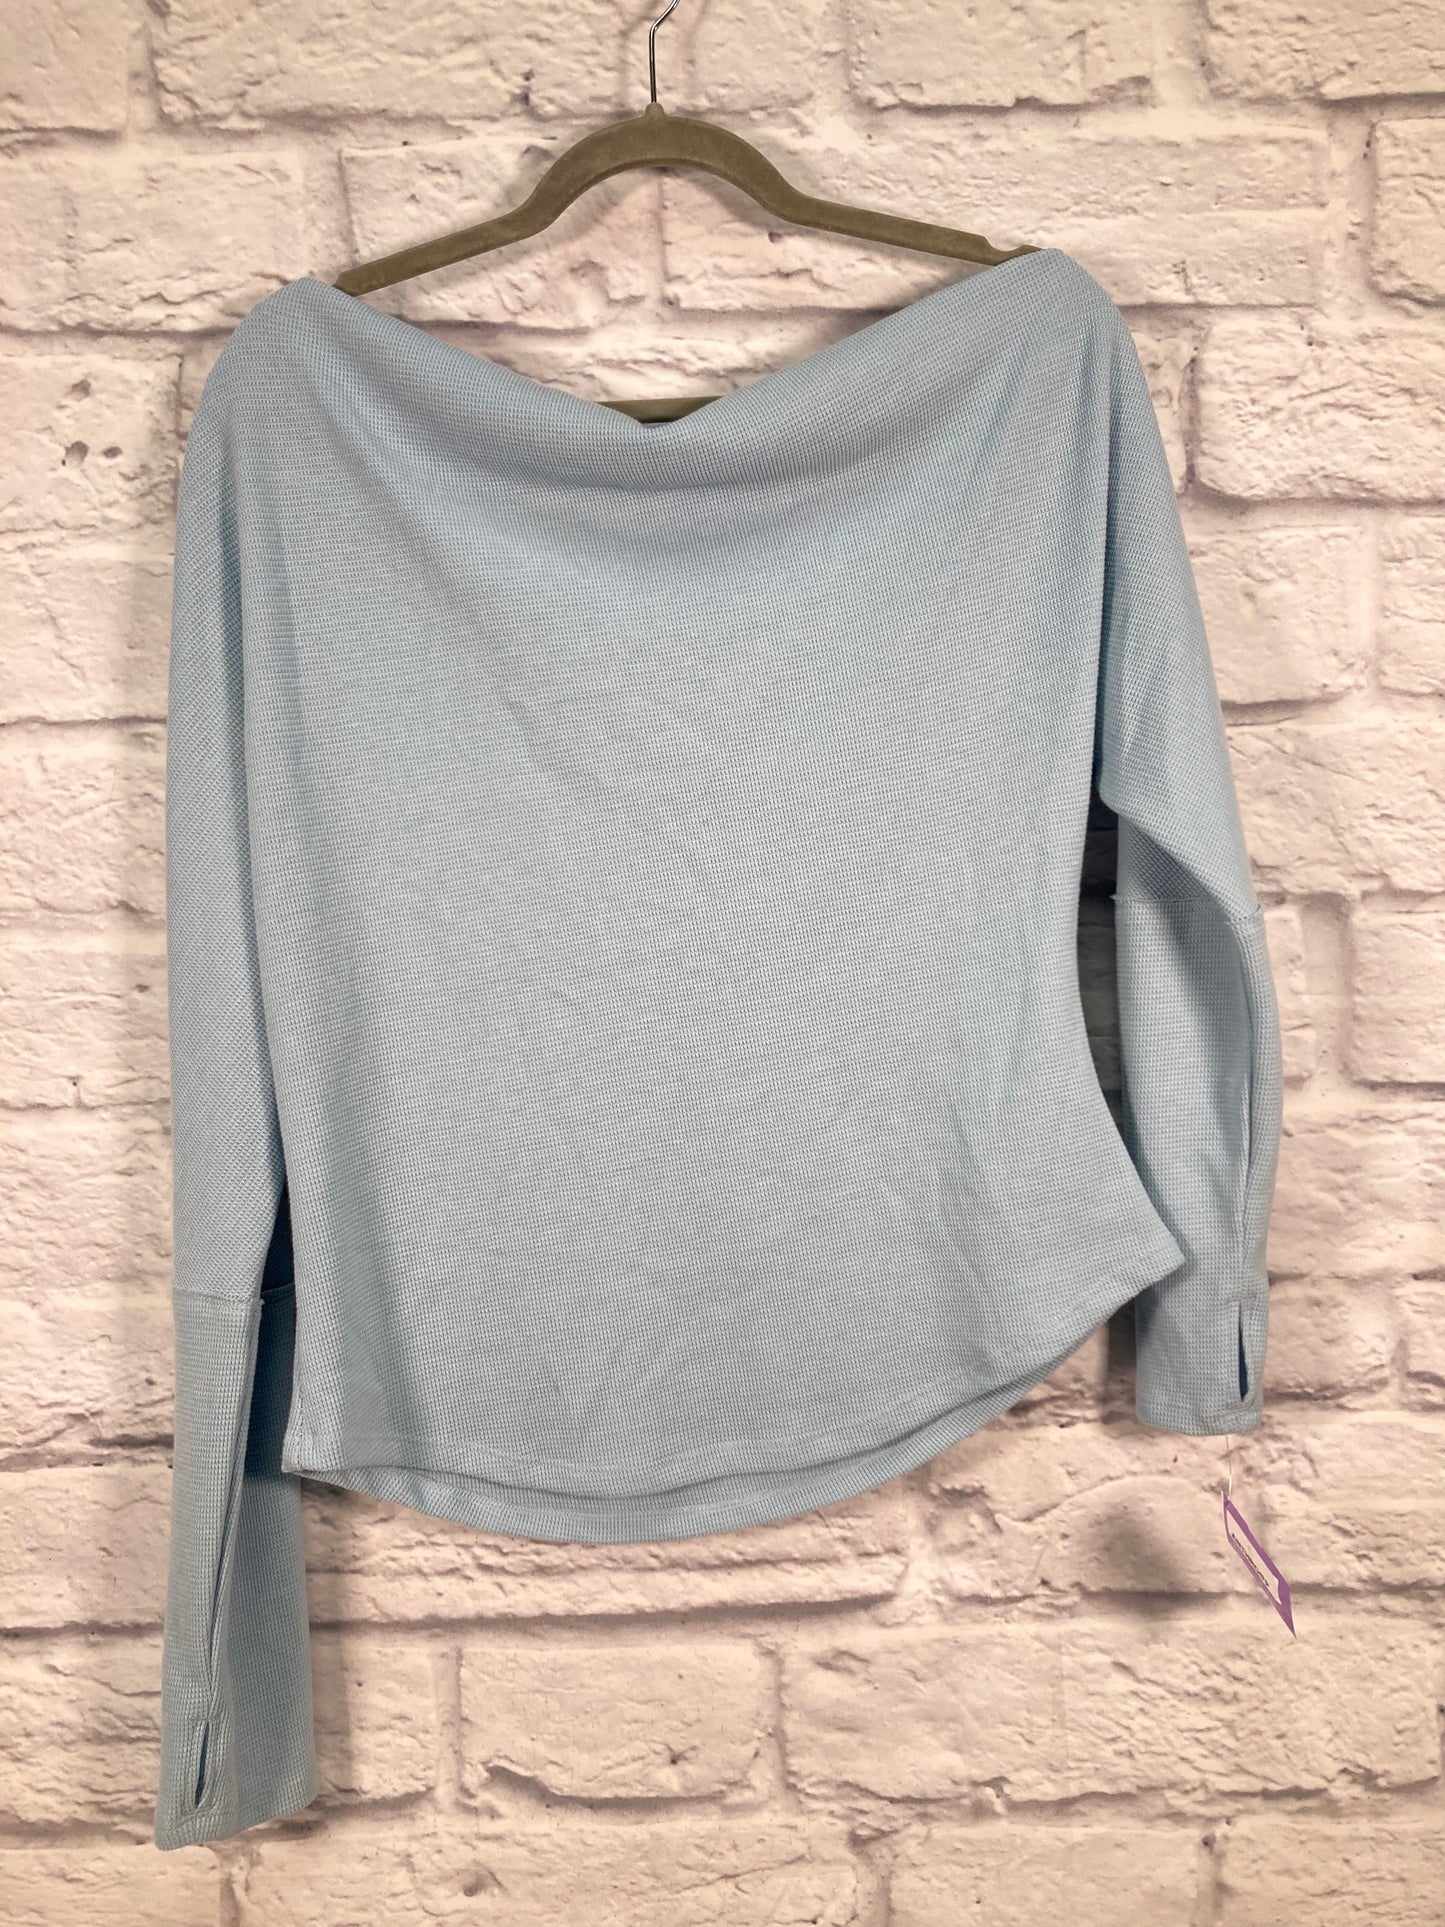 Blue Top Long Sleeve We The Free, Size L